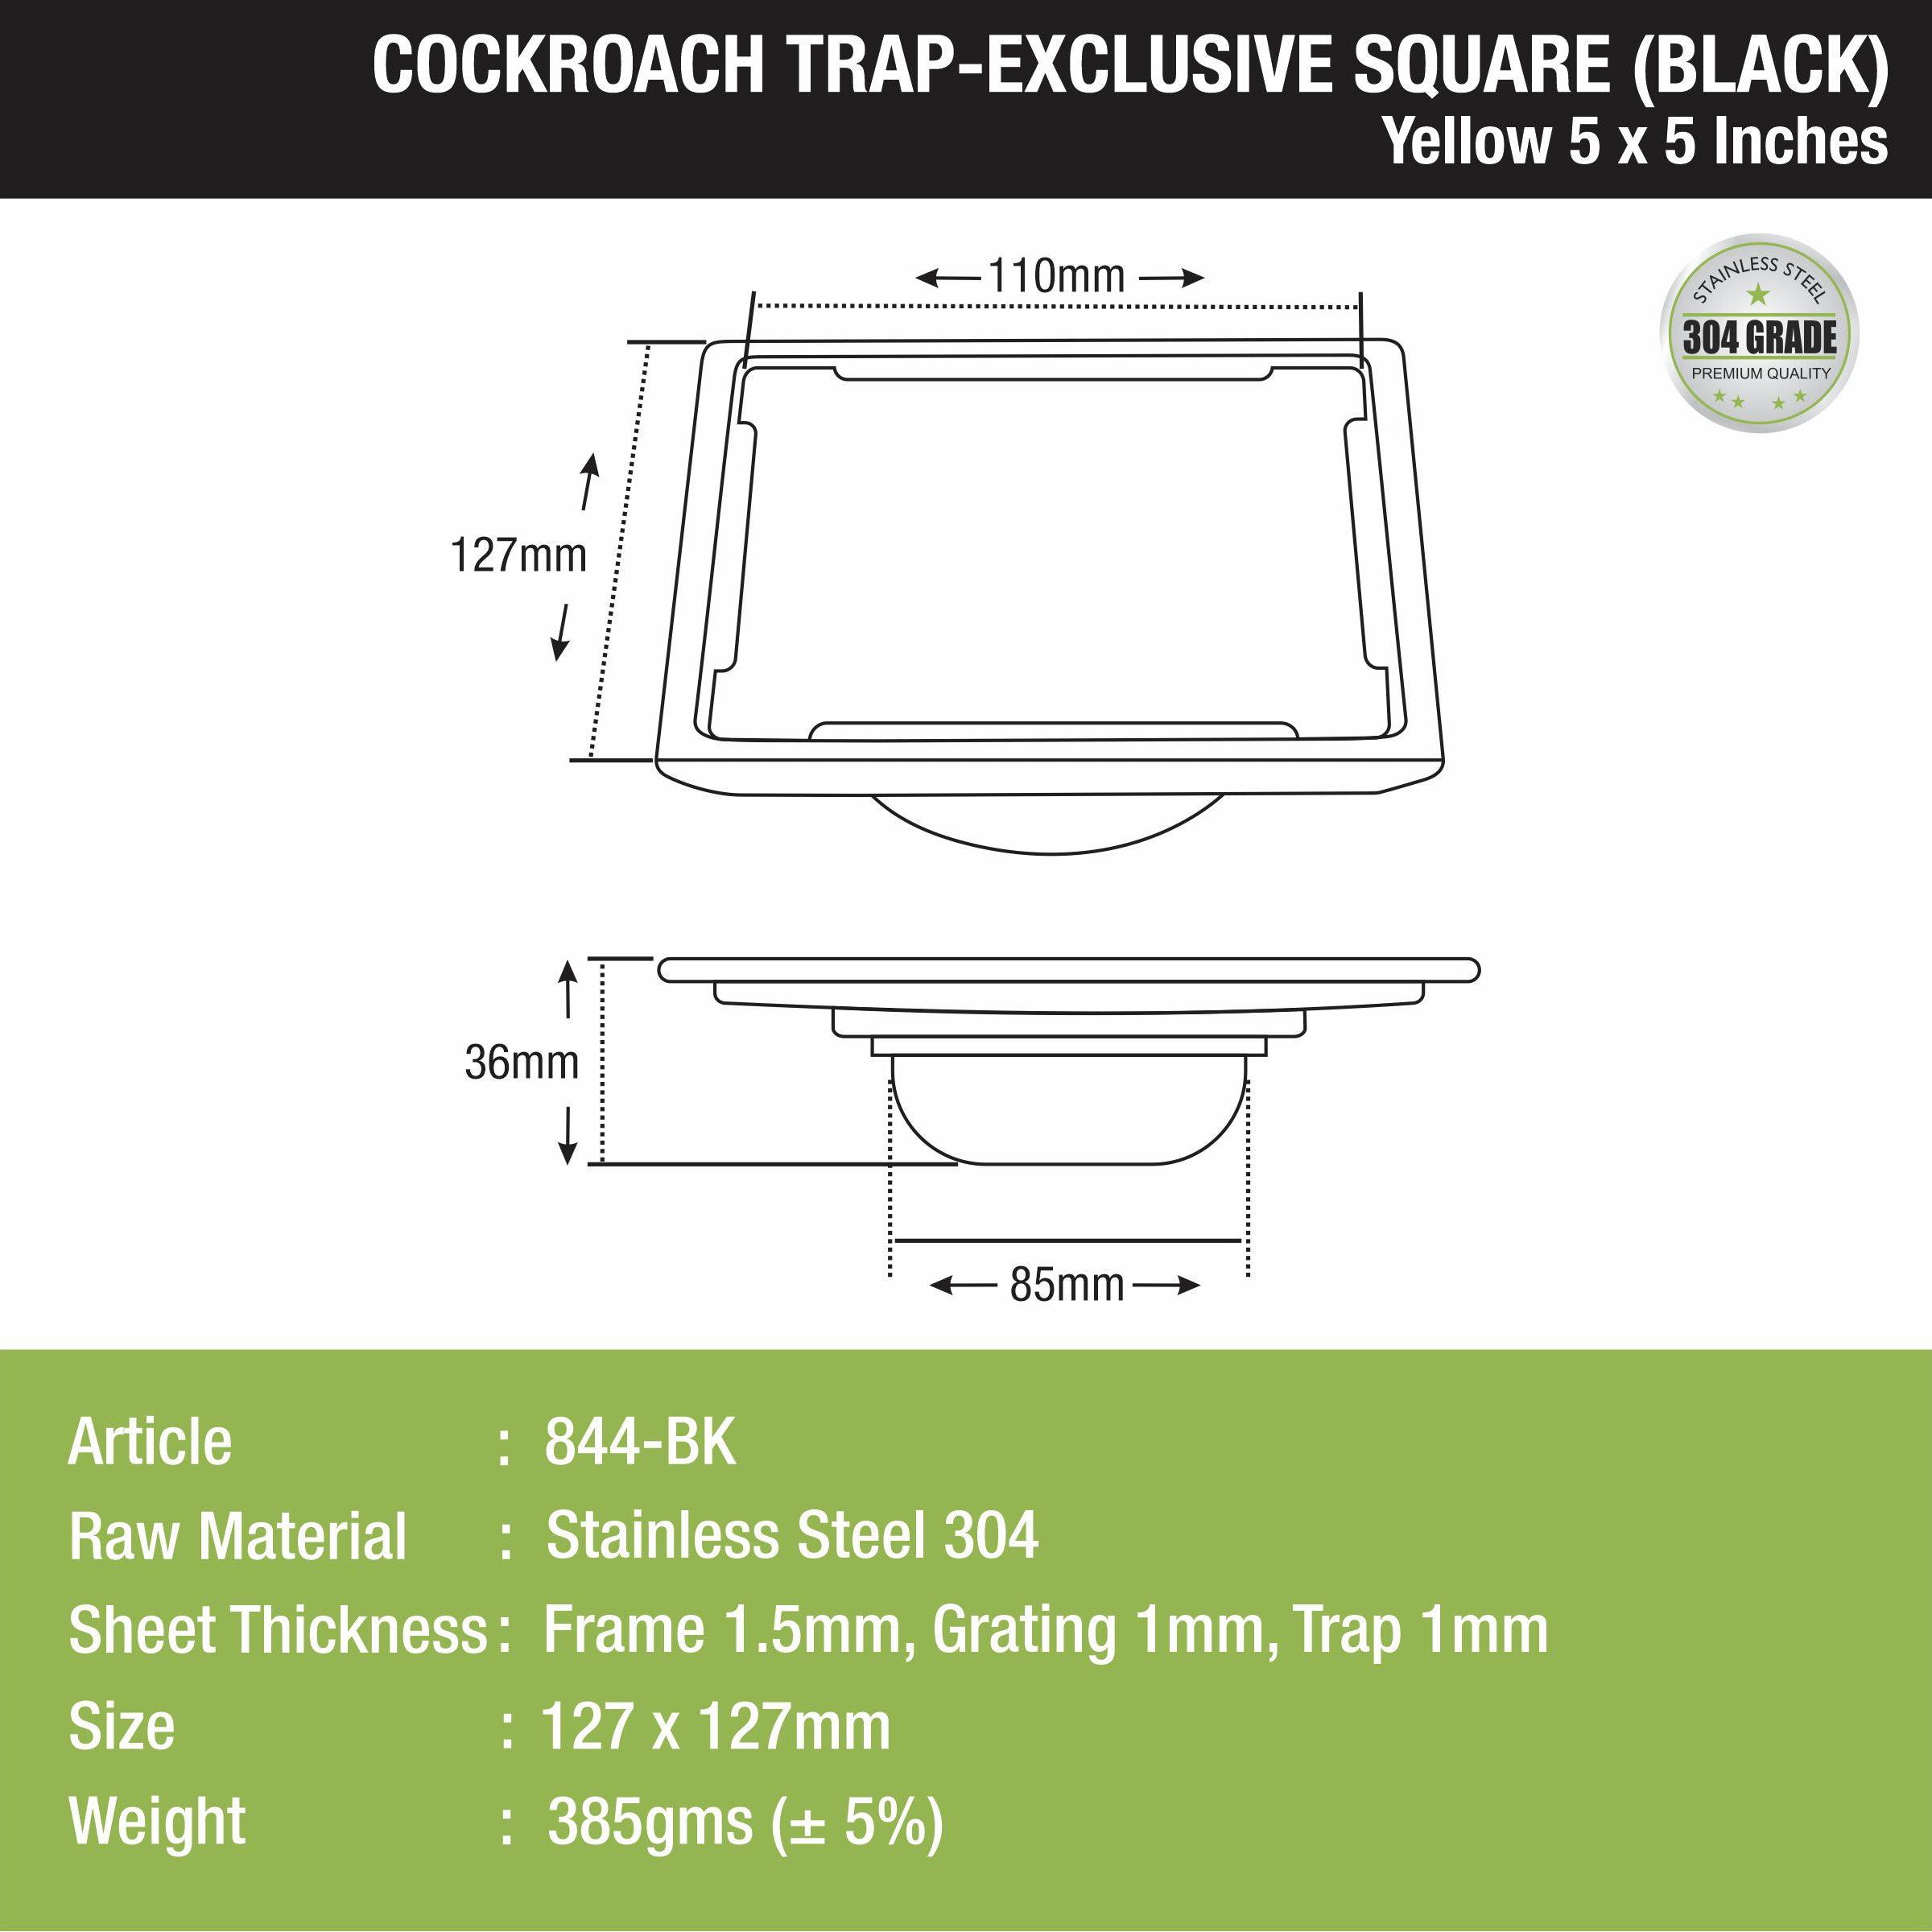 Yellow Exclusive Square Floor Drain in Black PVD Coating (5 x 5 Inches) with Cockroach Trap